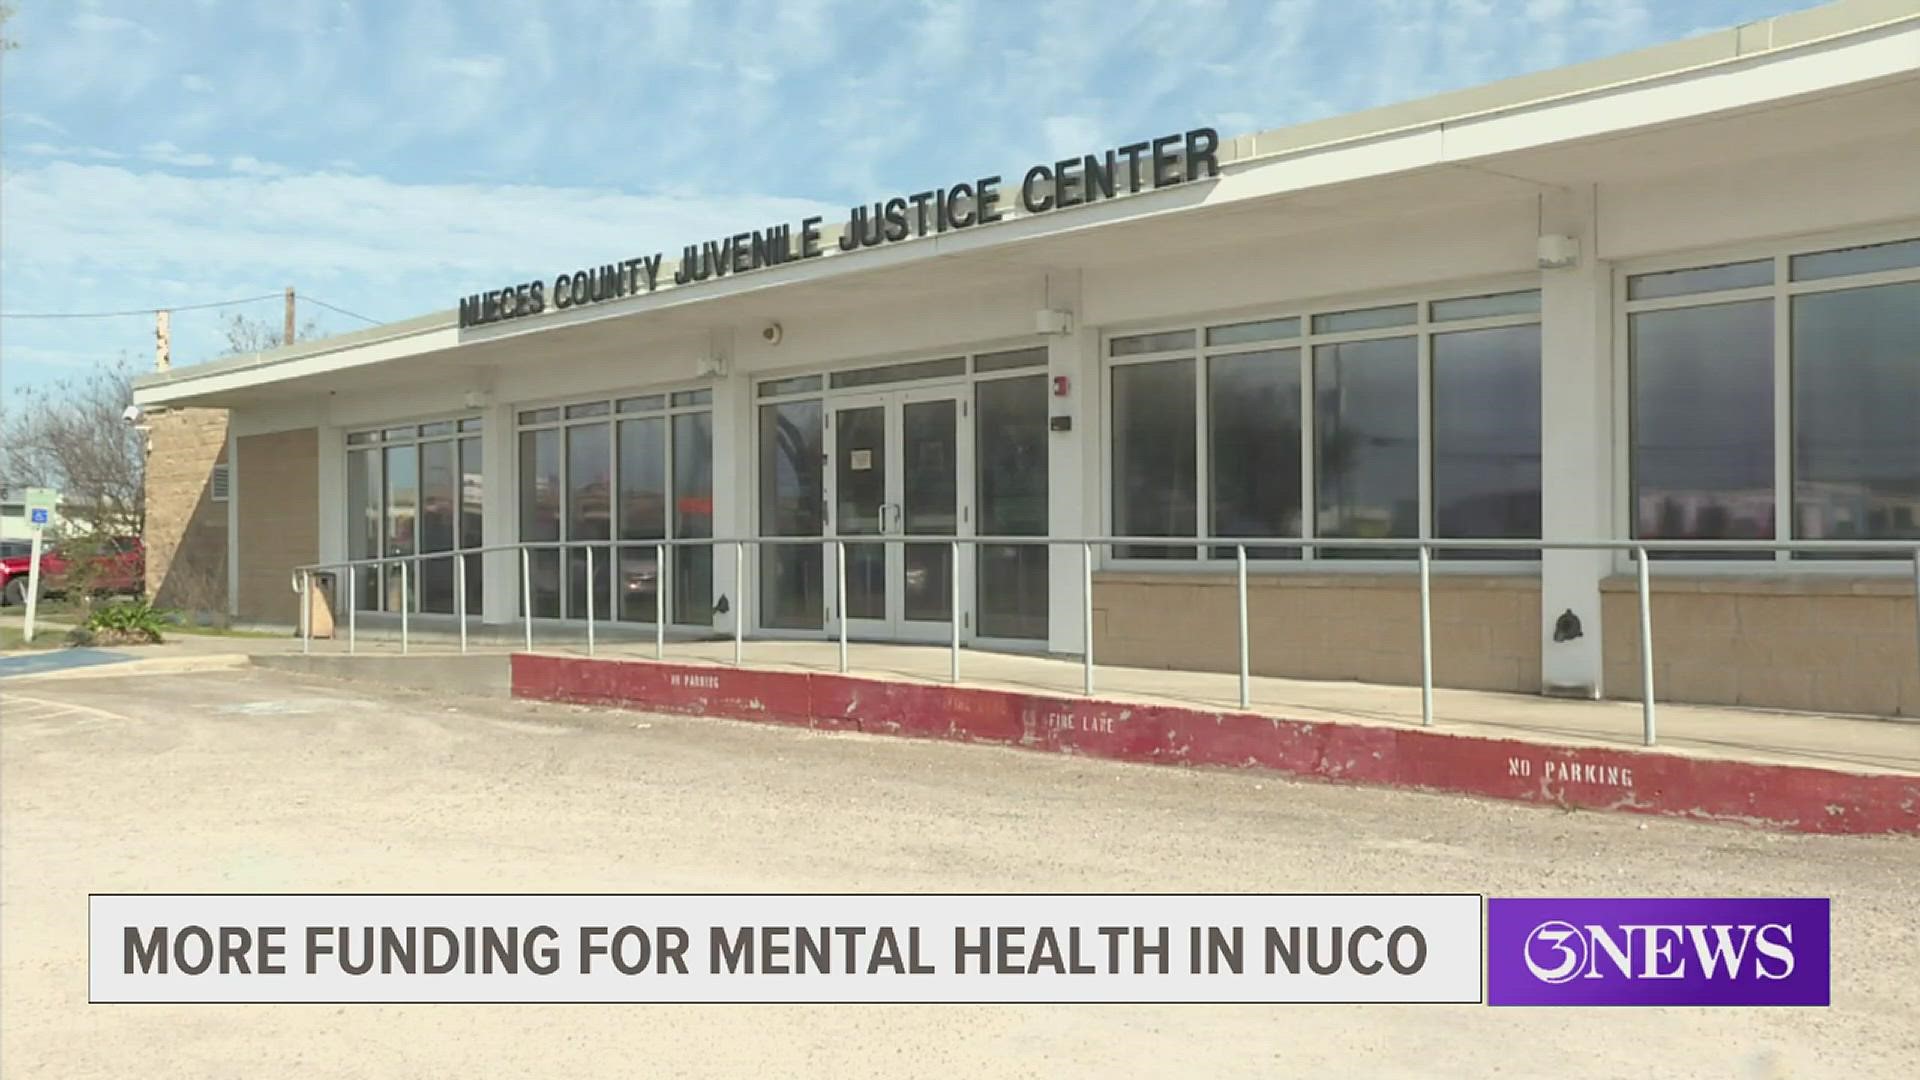 Director Juvenile Probation for Nueces County Homer Flores said he is looking forward to smaller counties with limited resources having access to these services.